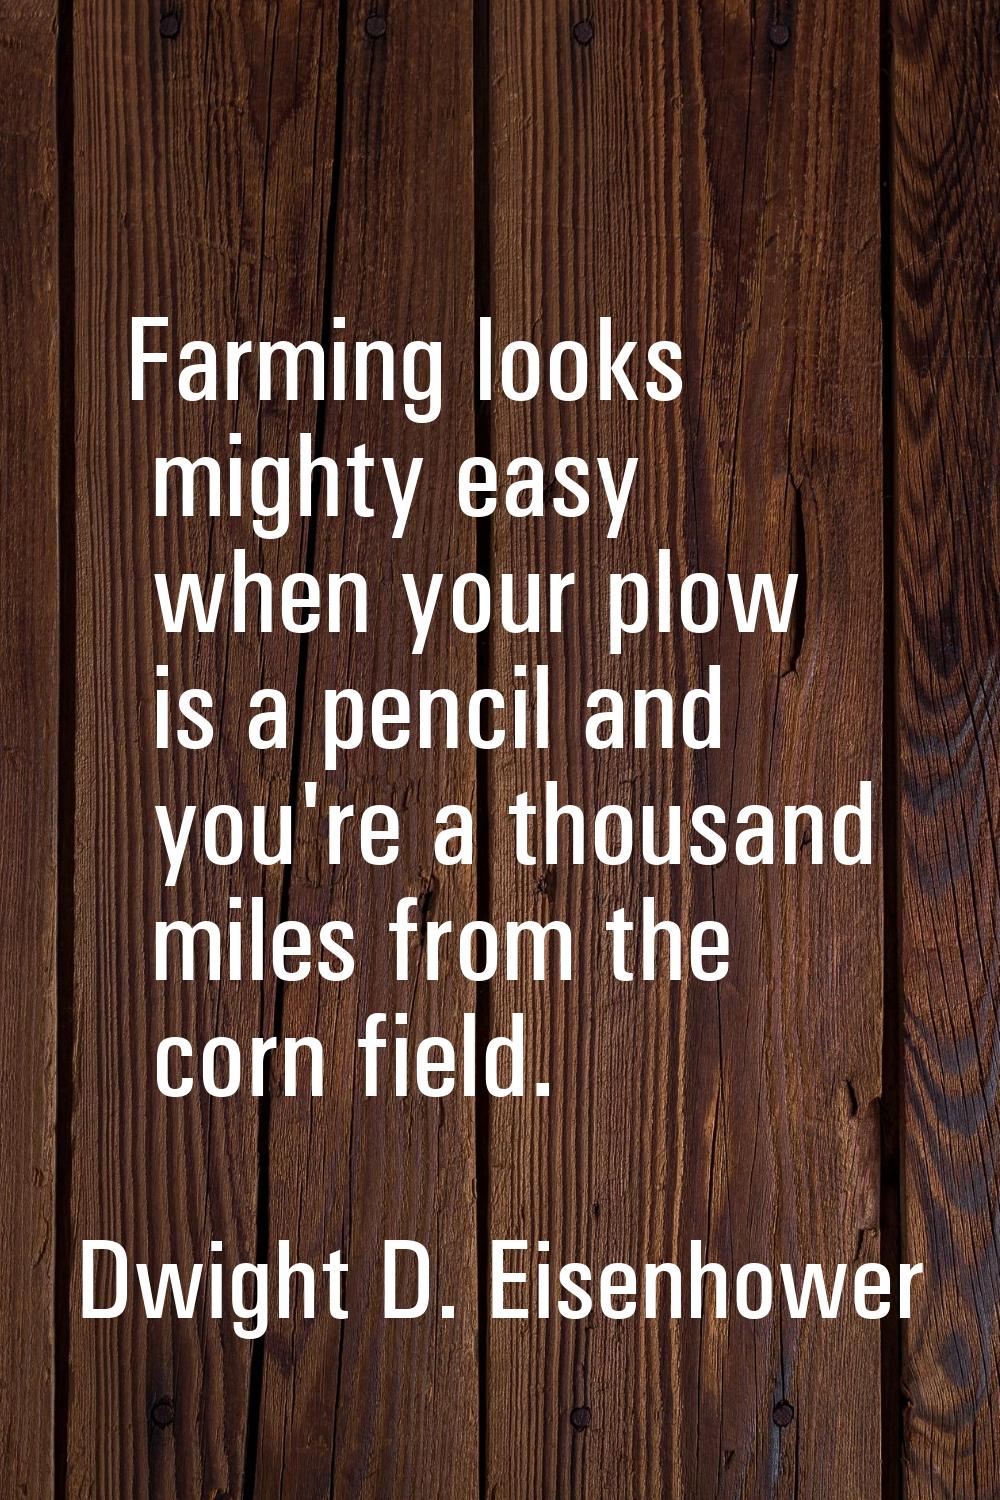 Farming looks mighty easy when your plow is a pencil and you're a thousand miles from the corn fiel